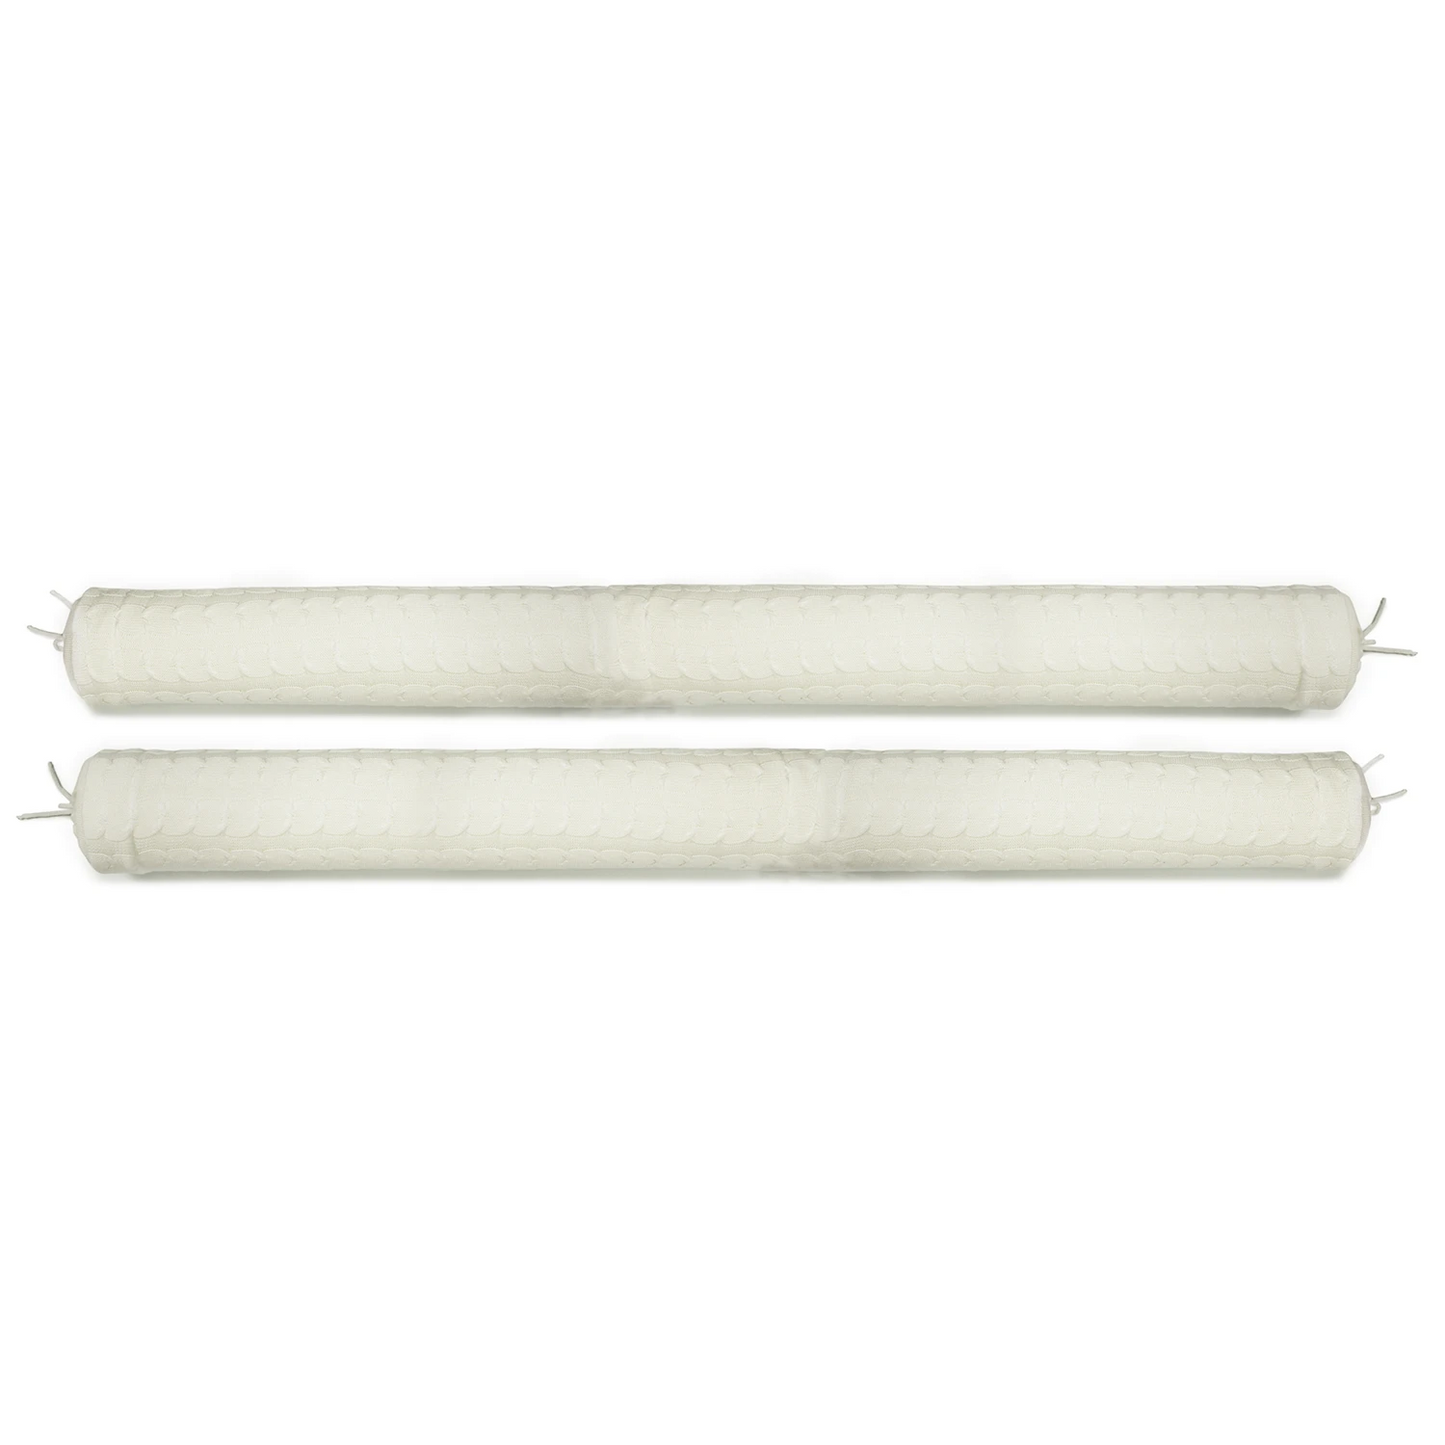 Rian Tricot Pillow Crib Side Protector Pair